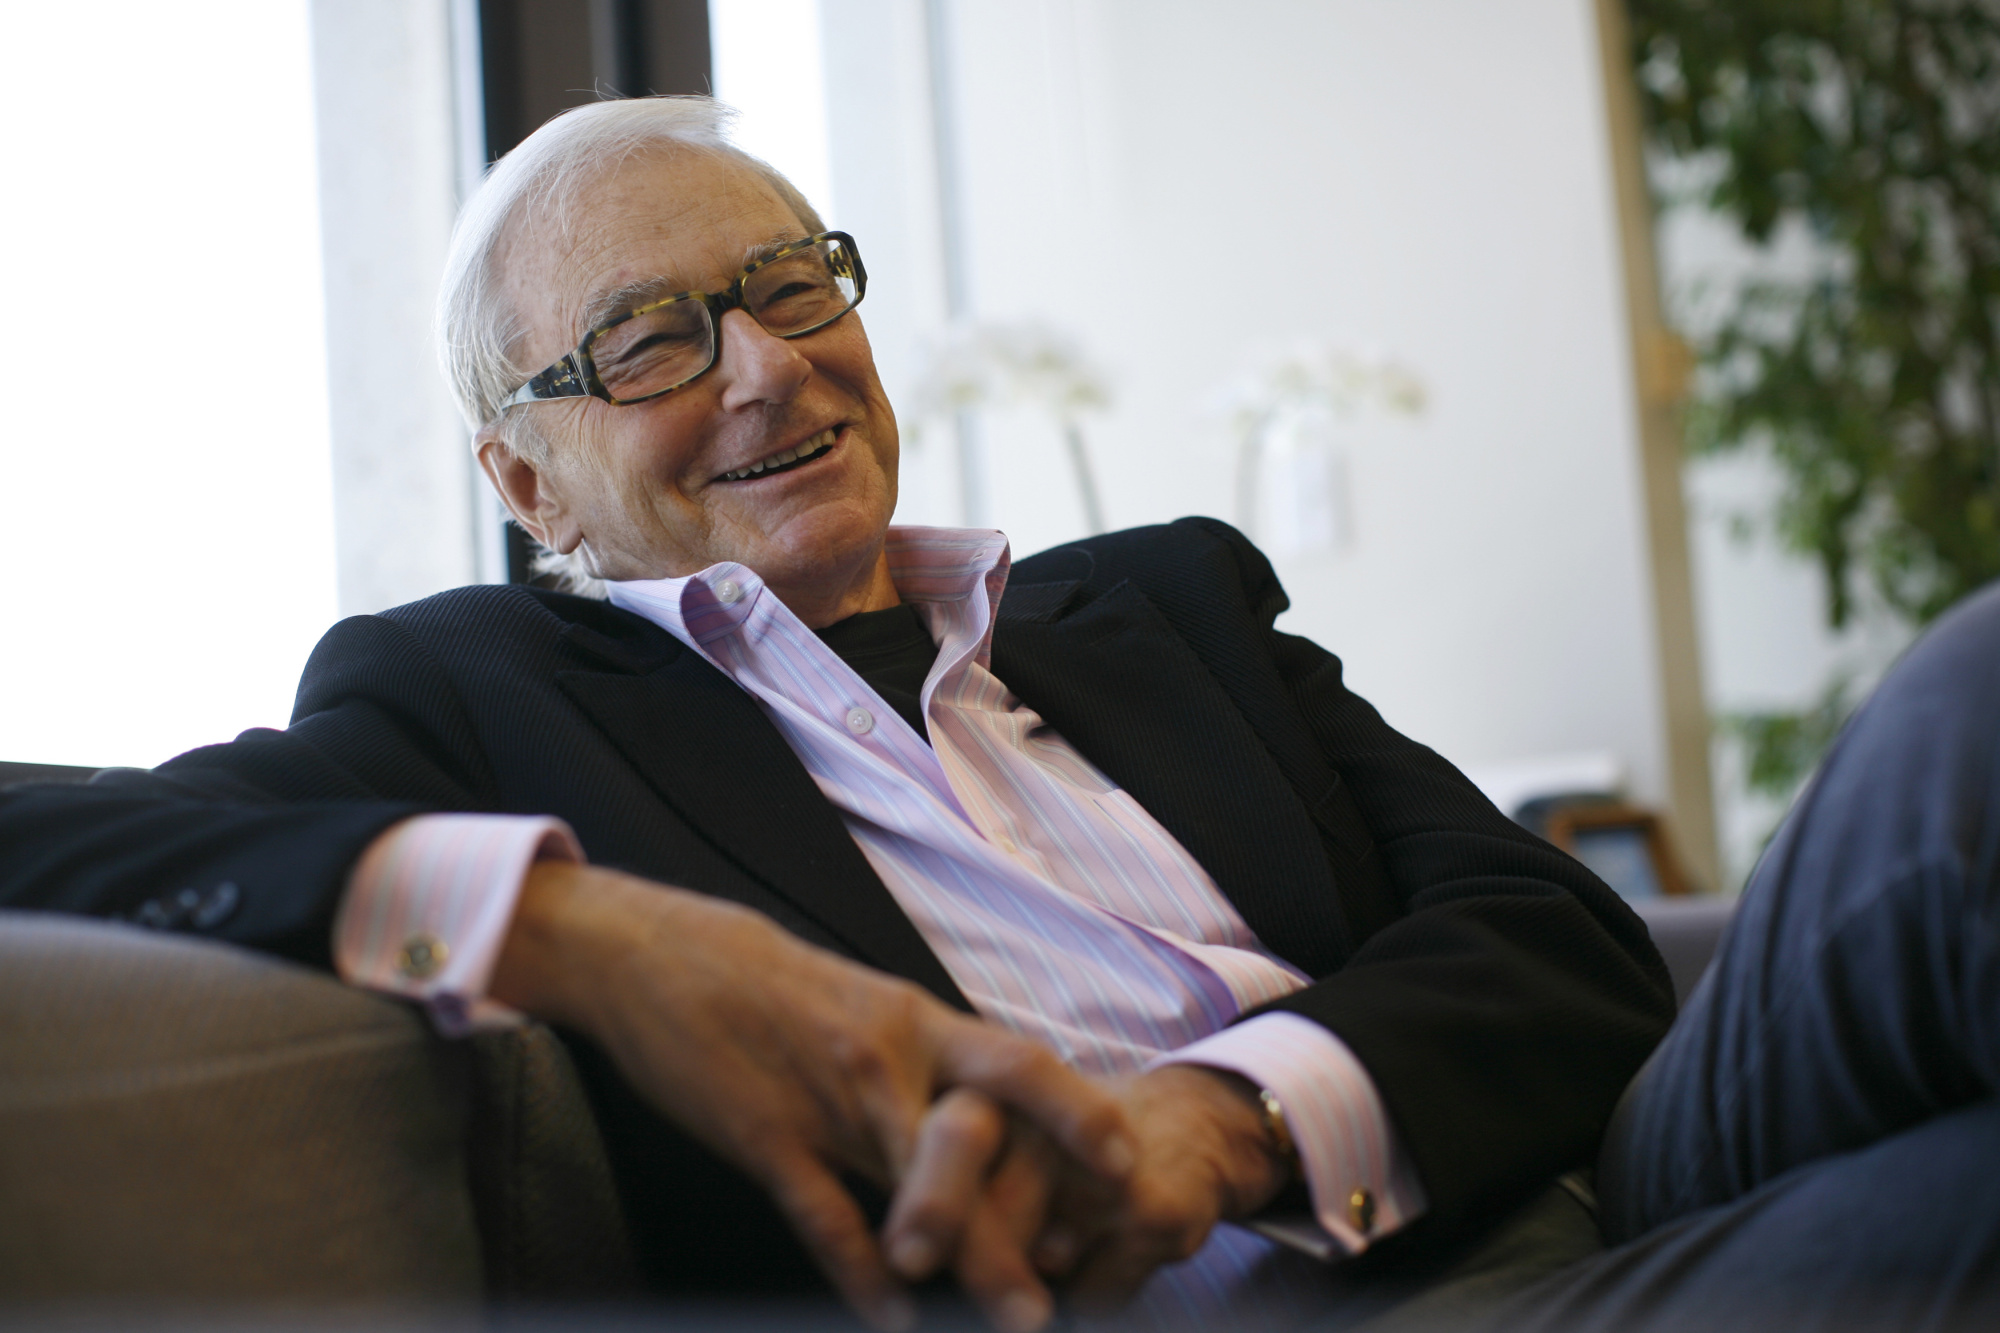 Venture capitalist Tom Perkins is interviewed in his office in San Francisco, California September 12, 2011. Perkins is a co-founder of venture capital firm Kleiner Perkins and the backer of companies ranging from Genentech to Google.